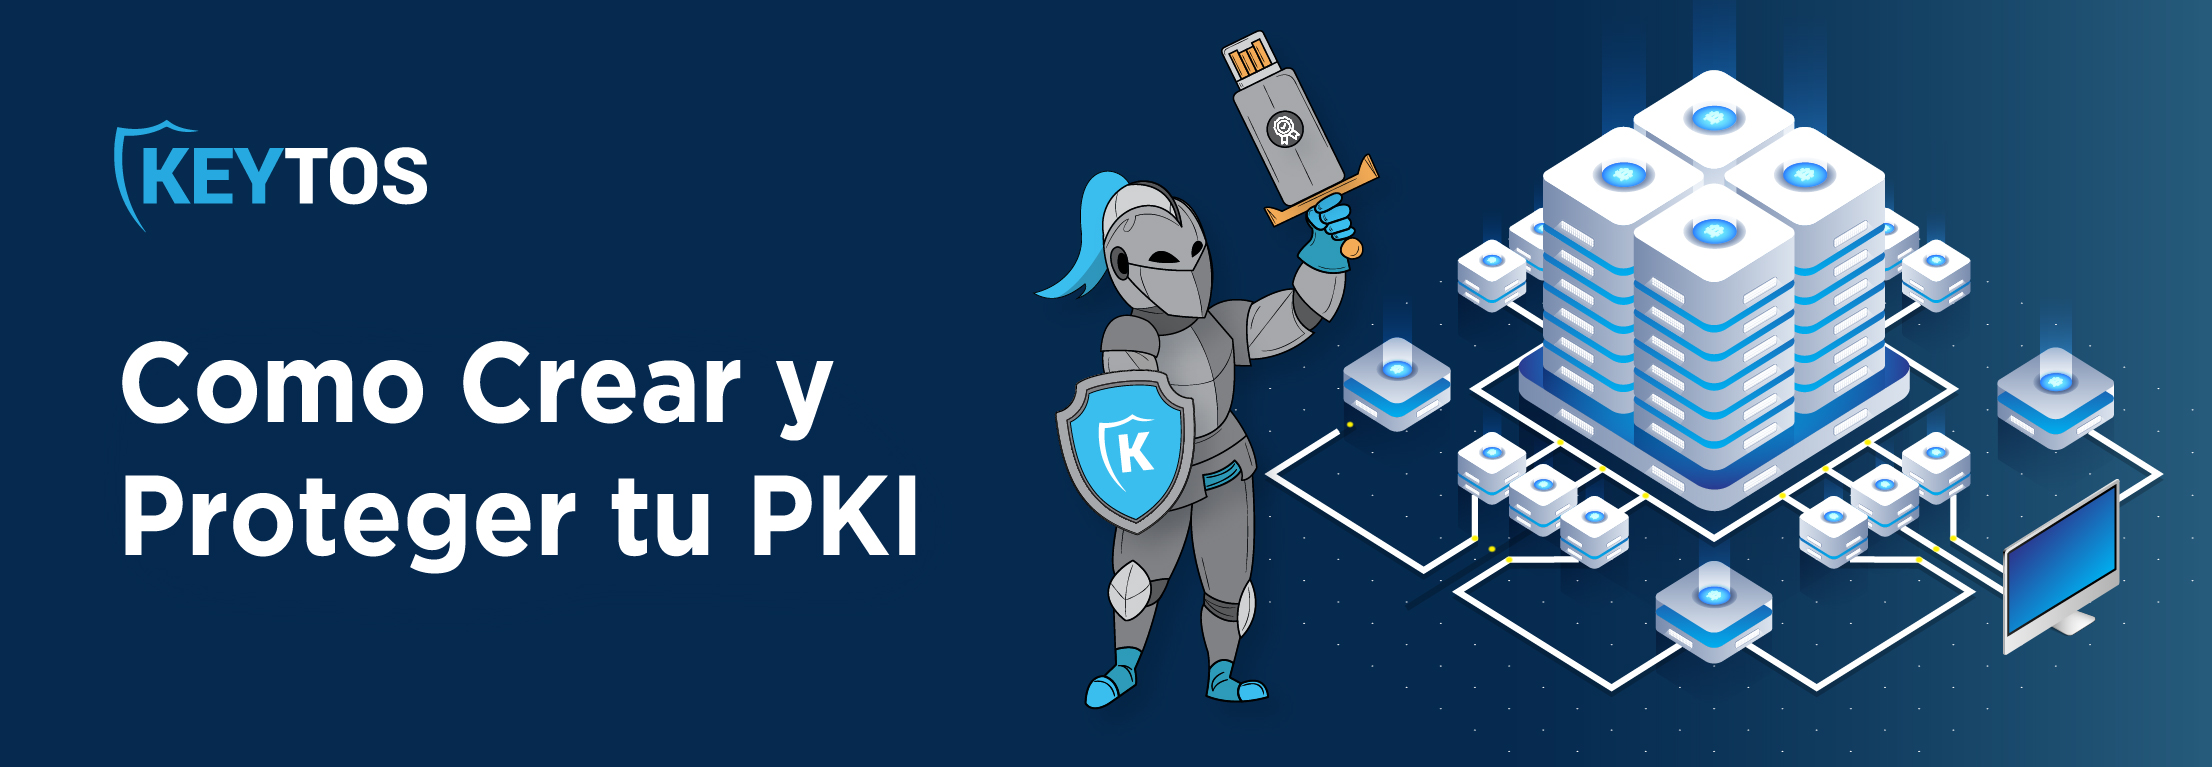 How to Setup a Certificate Authority Following Best Practices for PKI